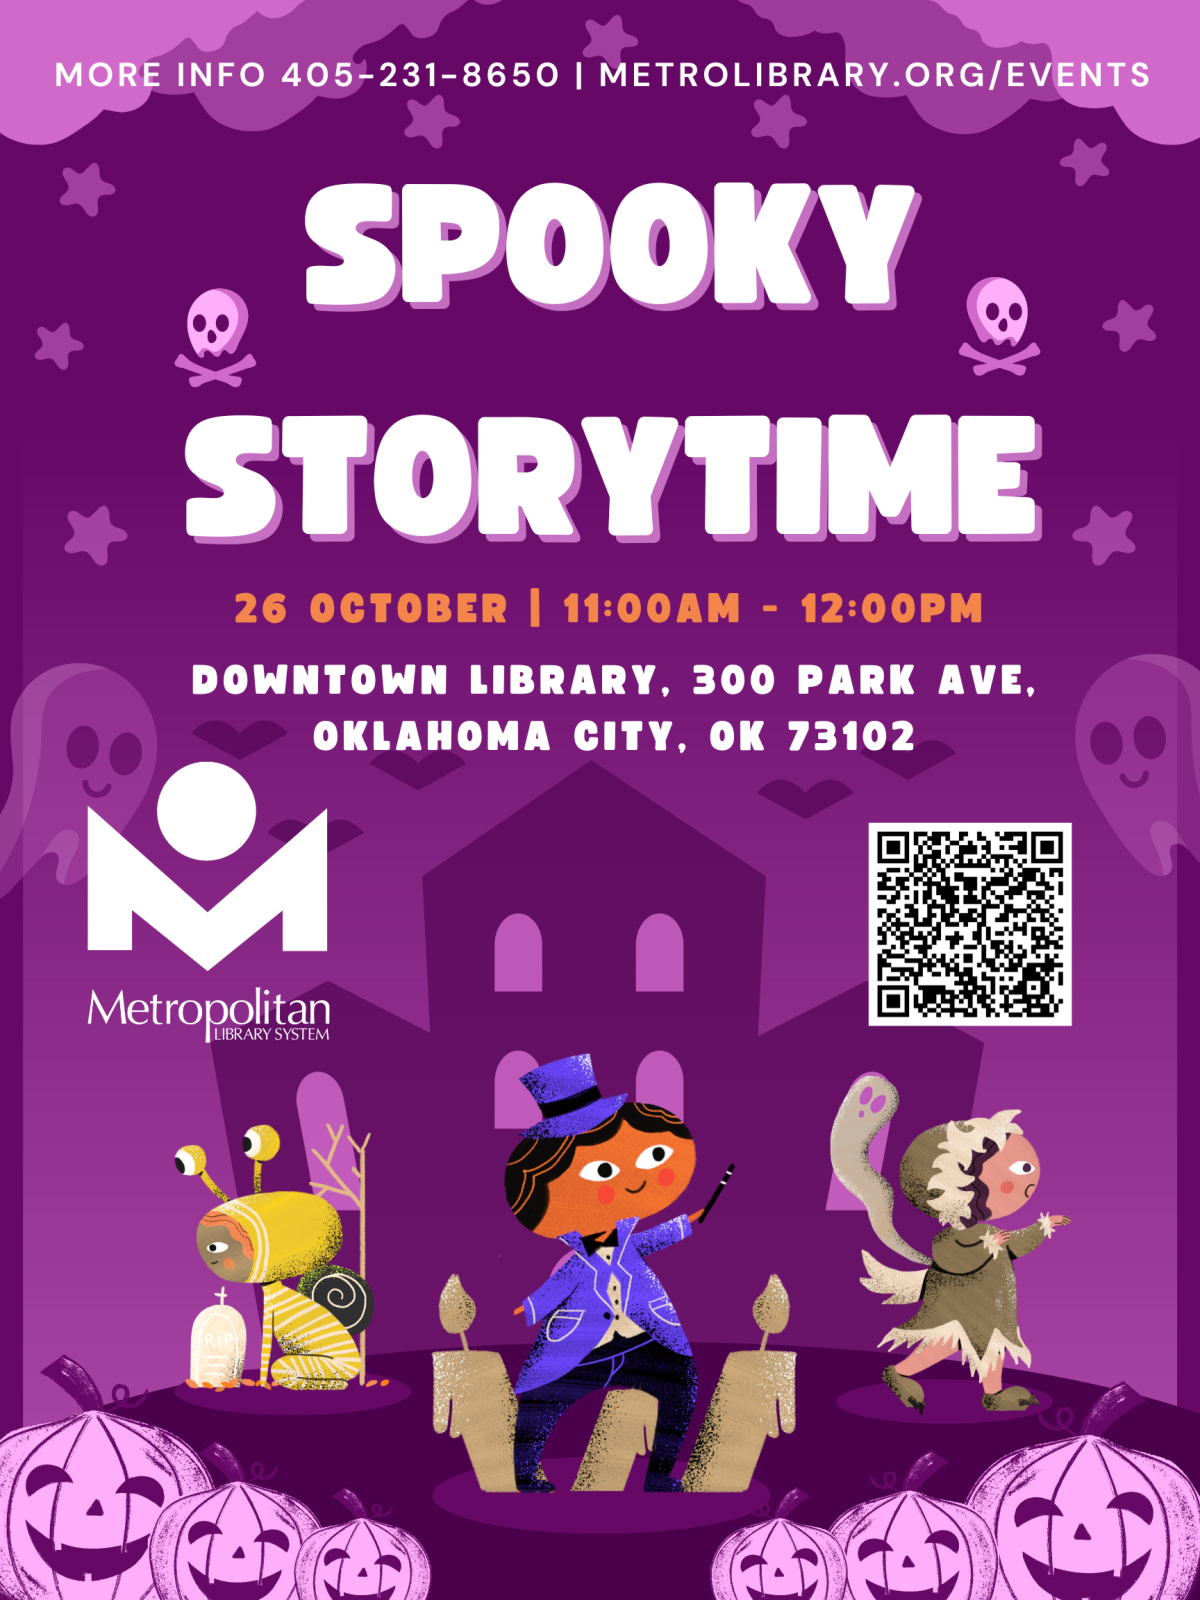 Join us for Spooky Storytime at the Downtown Library on October 26th from 11:00am-12:00pm.